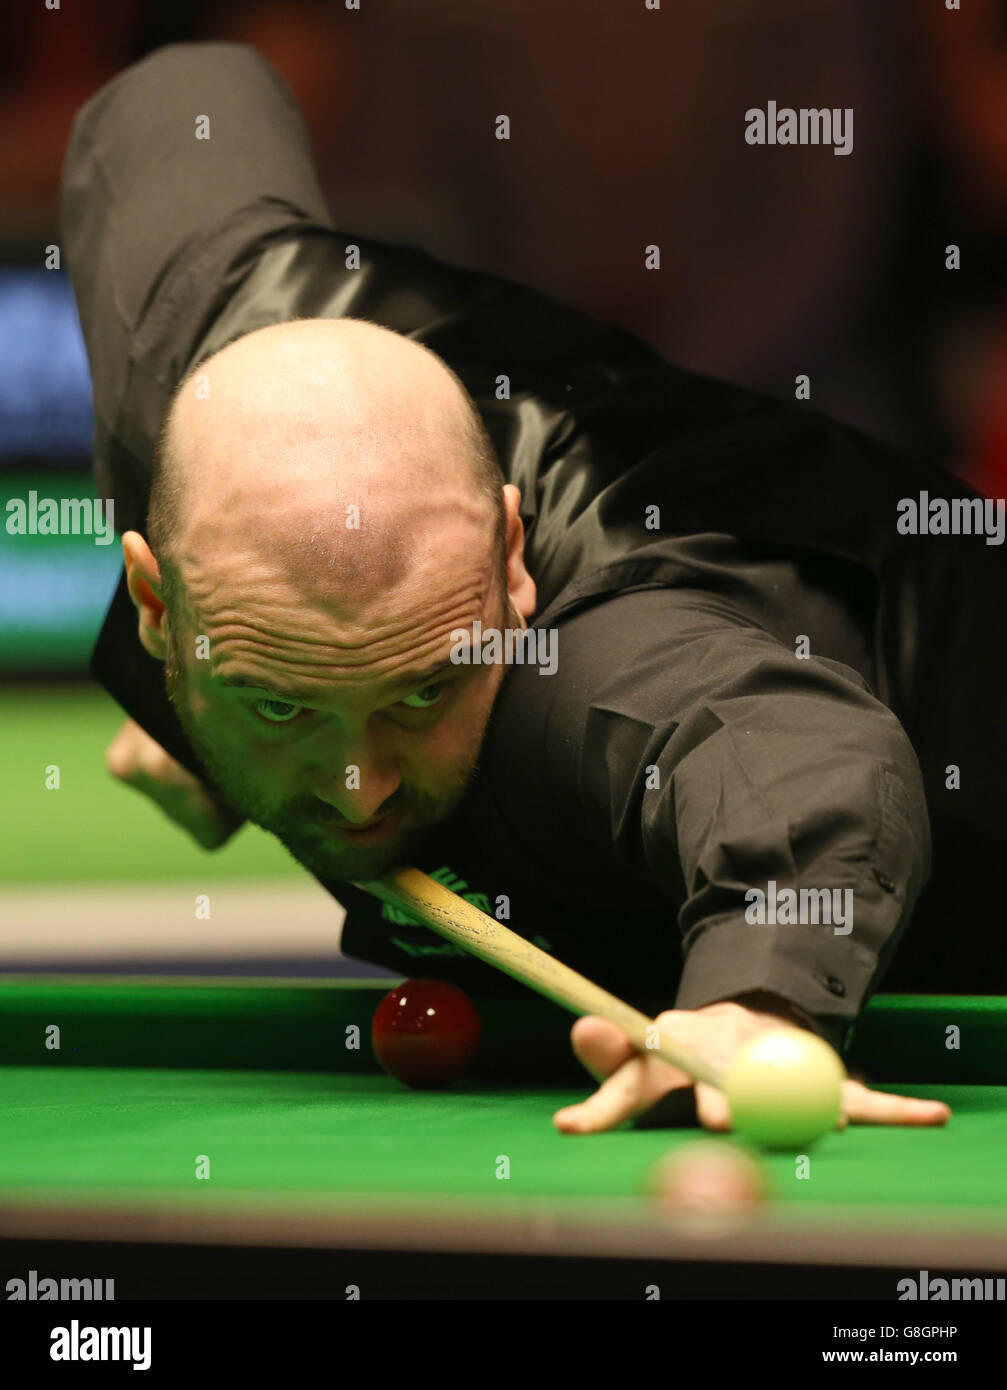 Jamie Burnett in action against John Higgins during day nine of the 2015 Betway UK Snooker Championship at The York Barbican, York. PRESS ASSOCIATION Photo. Picture date: Thursday December 3, 2015. See PA story SNOOKER York. Photo credit should read: Simon Cooper/PA Wire Stock Photo